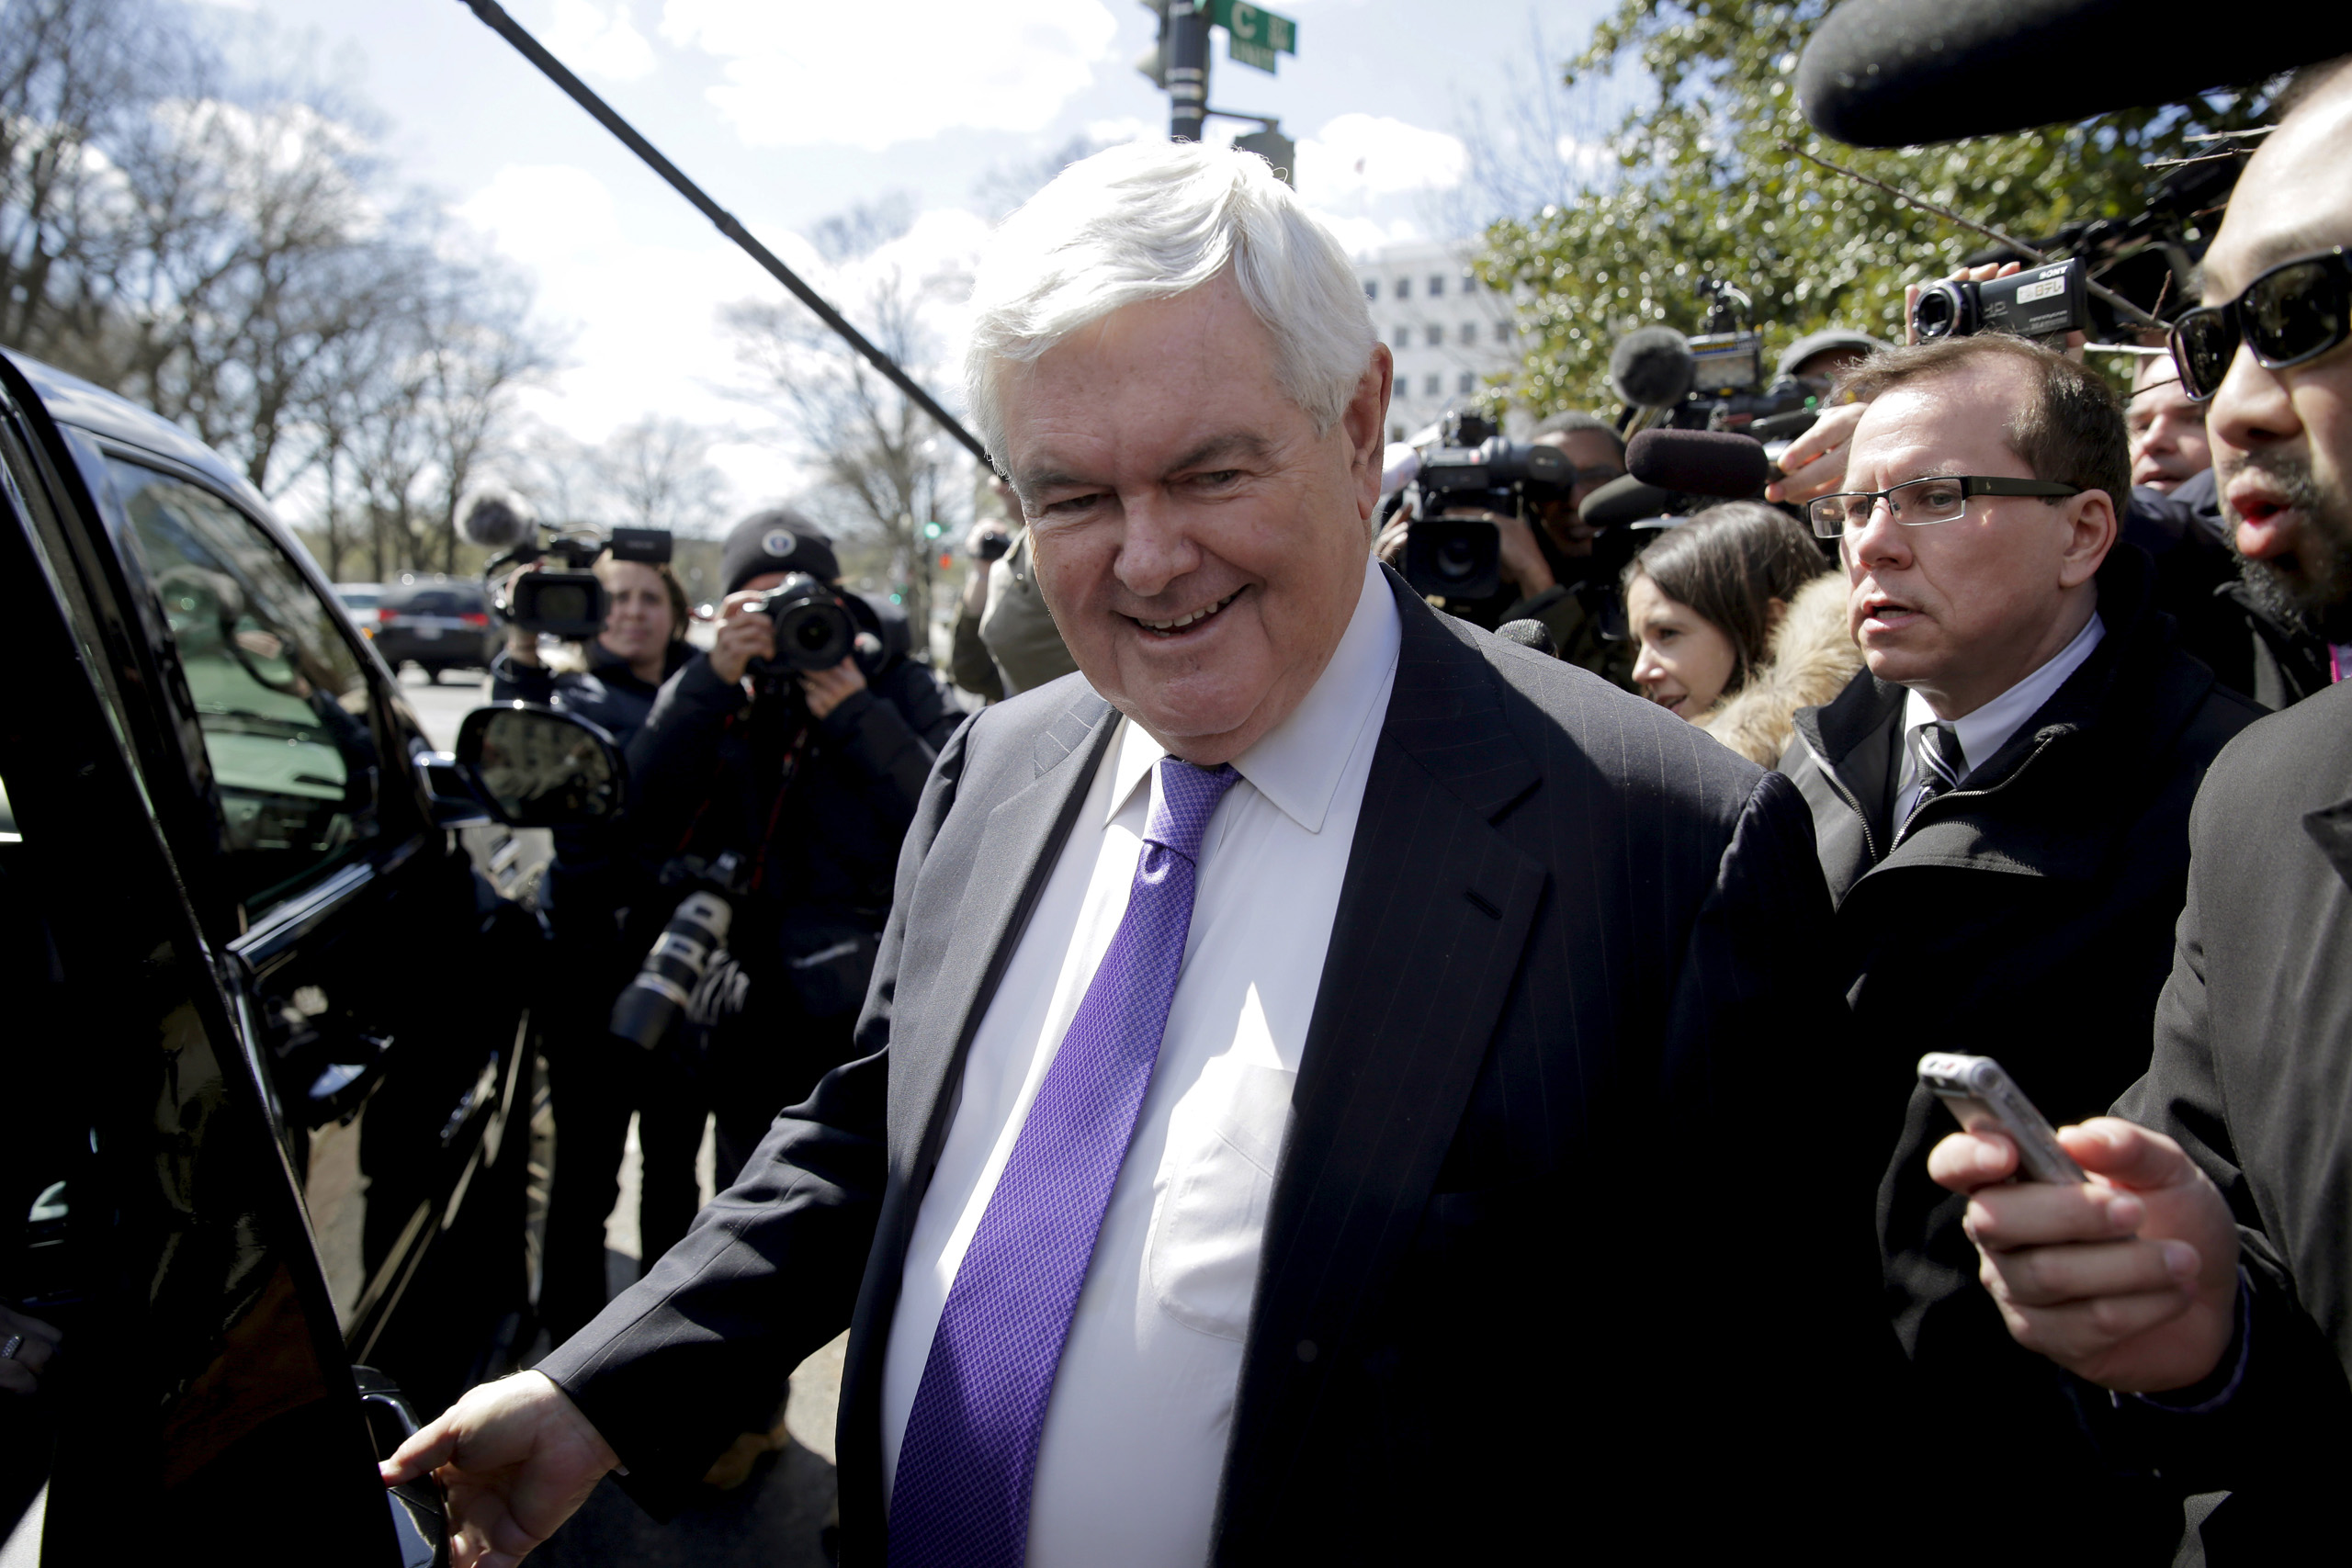 Newt Gingrich is followed by the media as he walks from a meeting with Republican presidential candidate Donald Trump in Washington, March 21, 2016. (Joshua Roberts—Reuters)